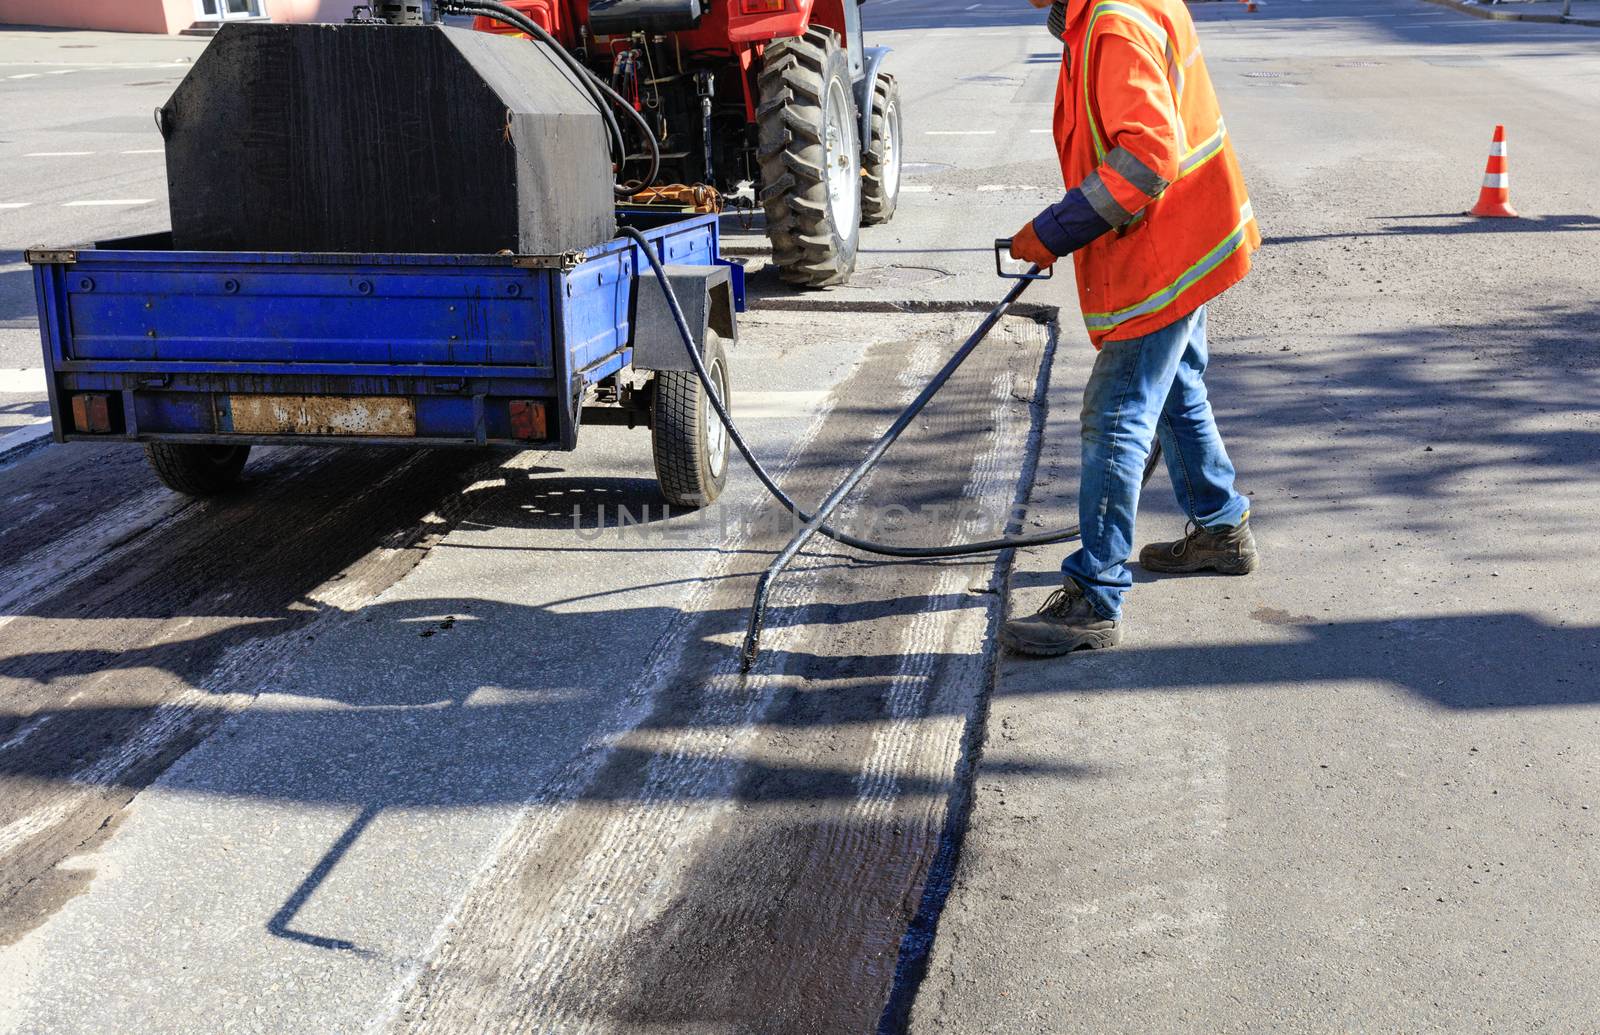 Service road maintenance worker sprays the bituminous mixture onto the cleaned area for better adhesion to the new asphalt.